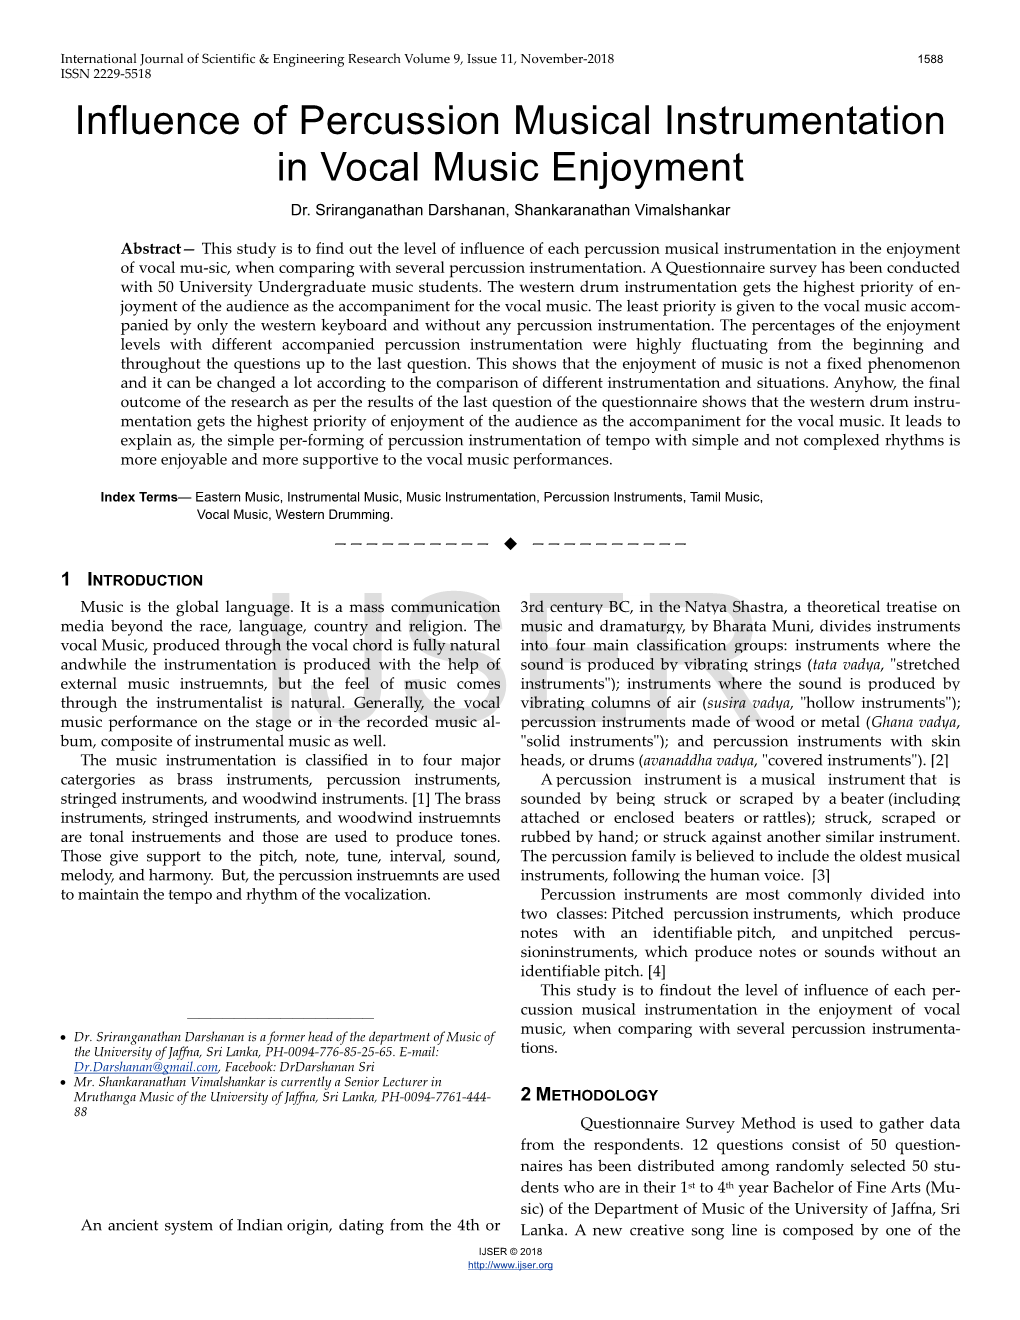 Influence of Percussion Musical Instrumentation in Vocal Music Enjoyment Dr